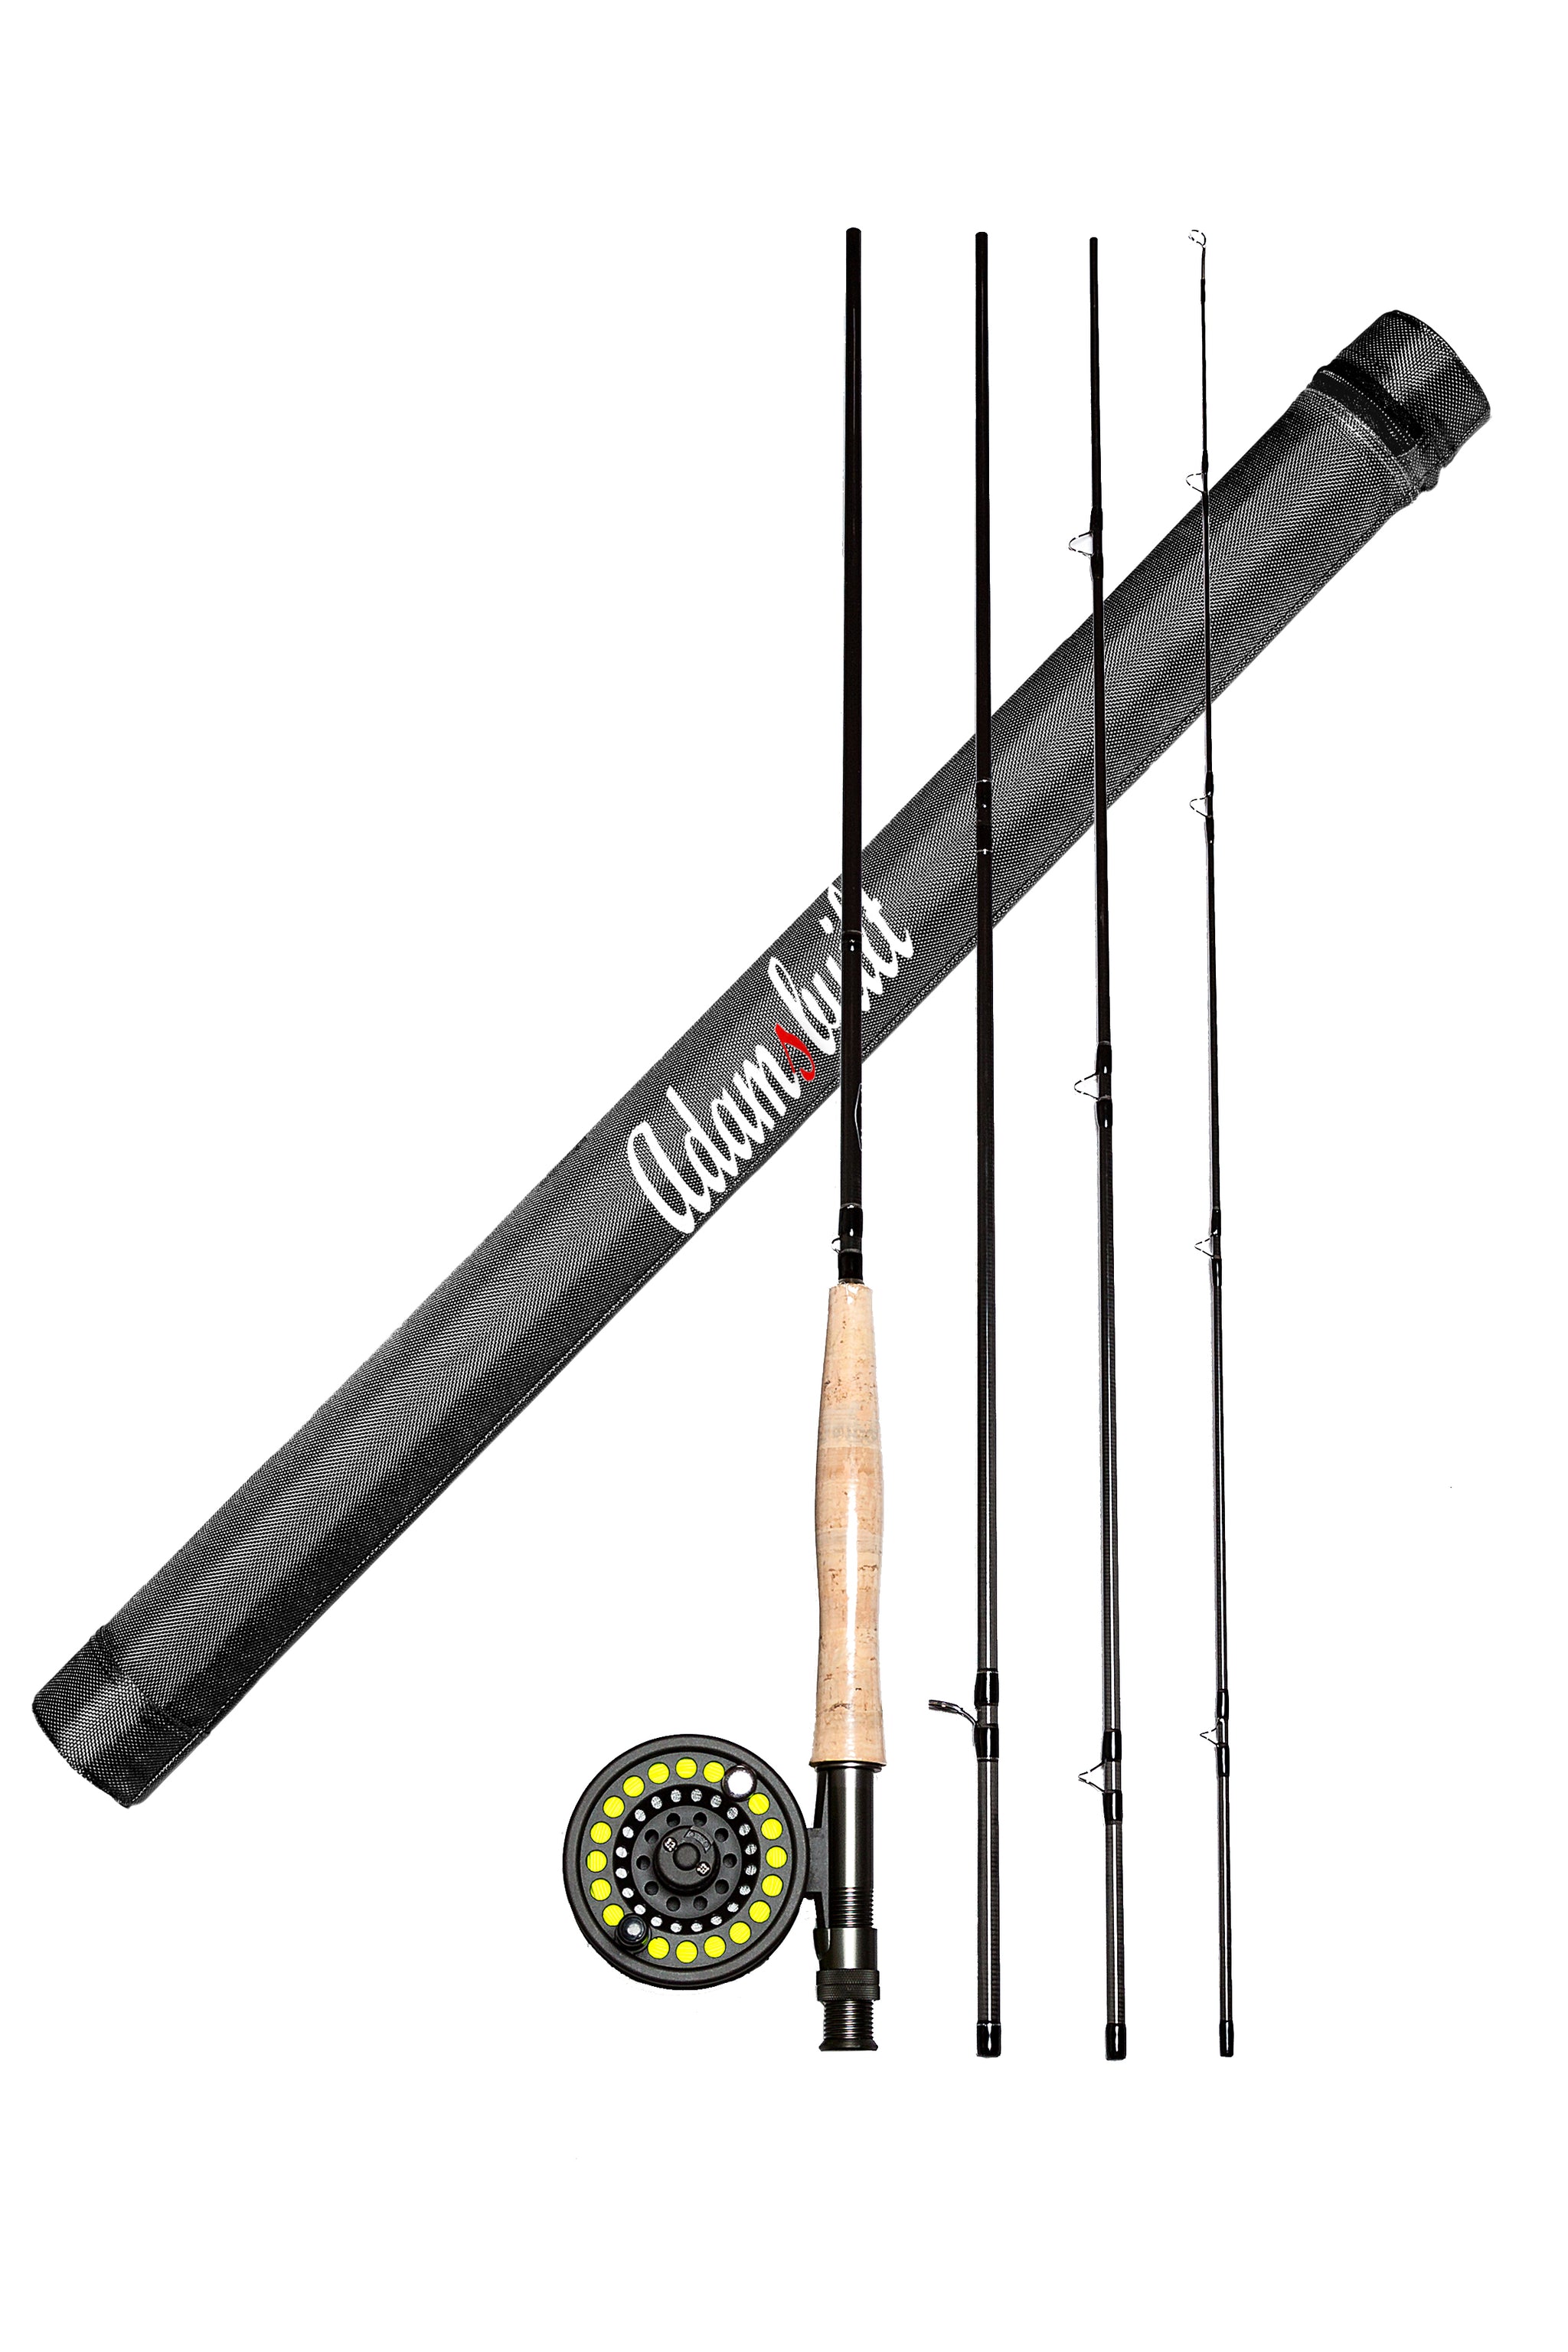 Learn to Fly Fish 9ft 5wt Combo (WAH) – Adamsbuilt Fishing, learn